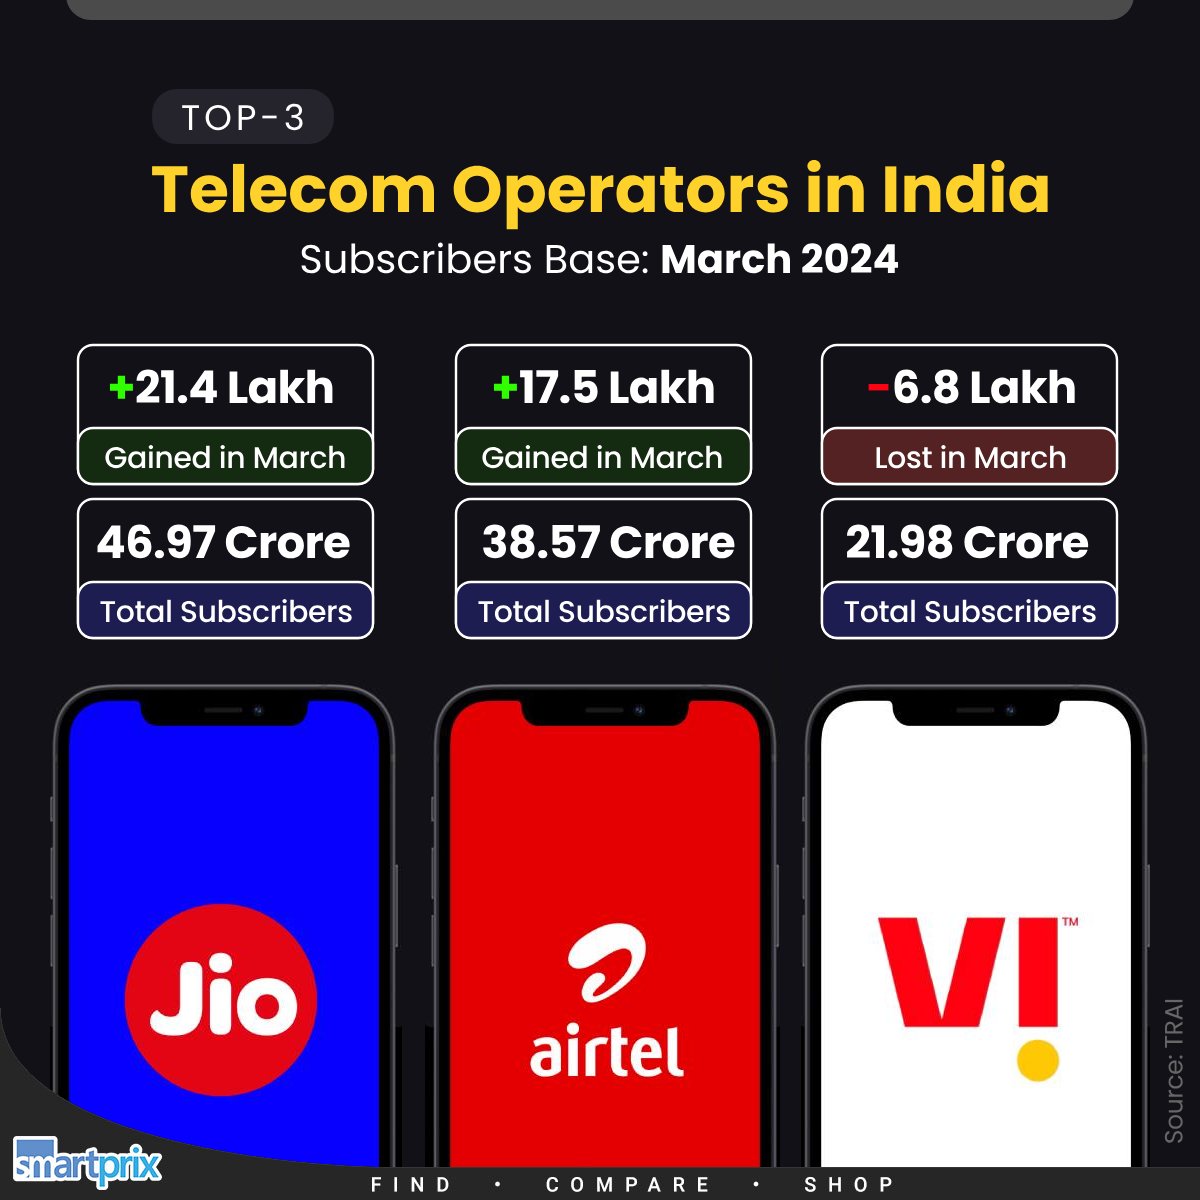 Jio and Airtel continue to gain subscribers from Vodafone Idea's loss Which mobile network are you currently using? #Jio #Airtel #VodafoneIdea #MobileNetwork #Telecom